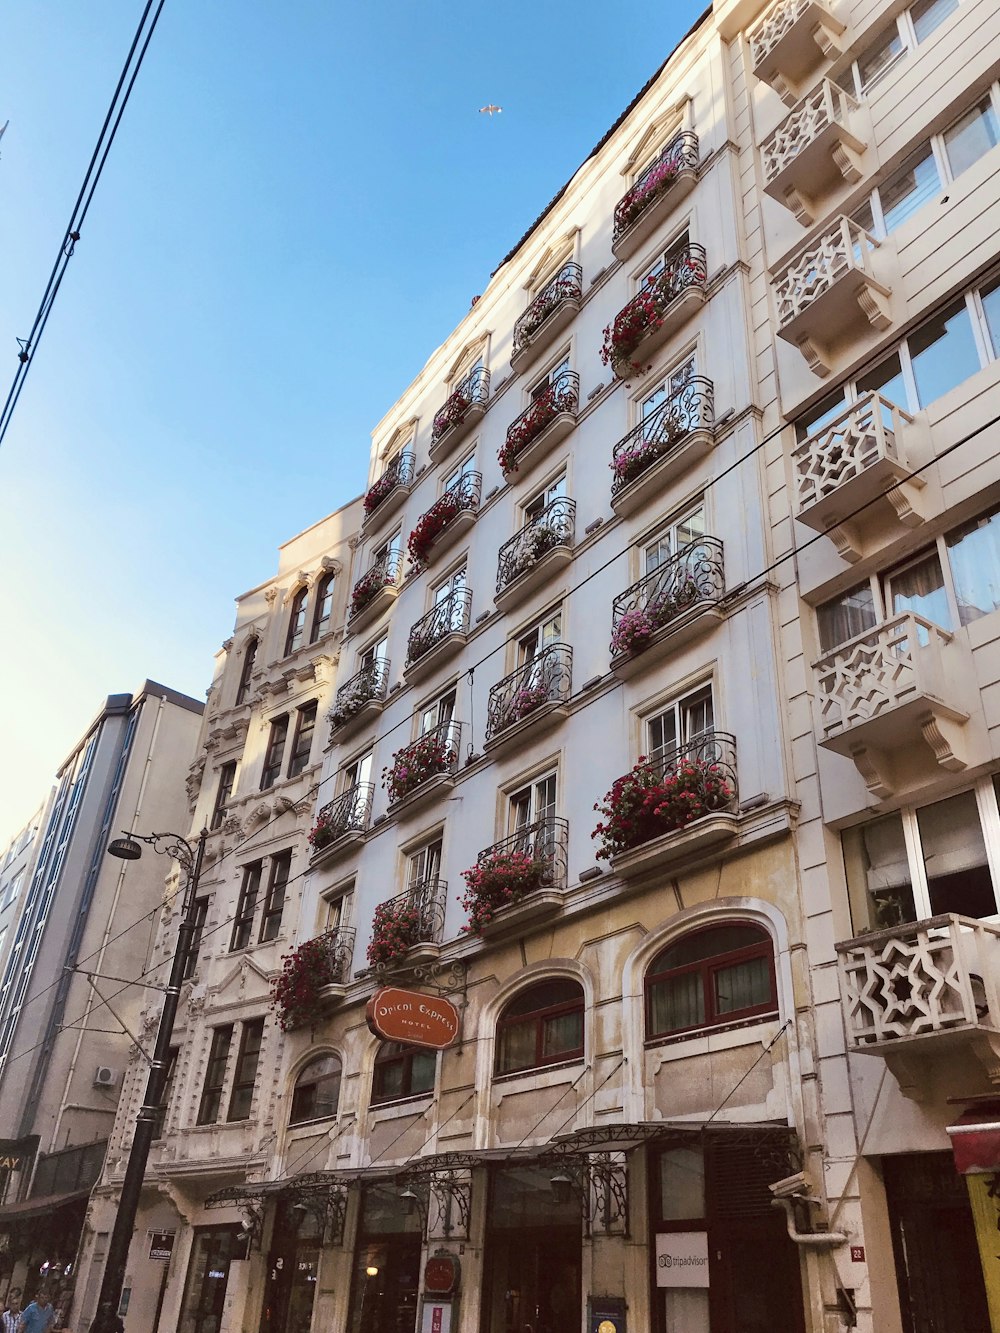 a tall building with balconies and flowers on the balconies